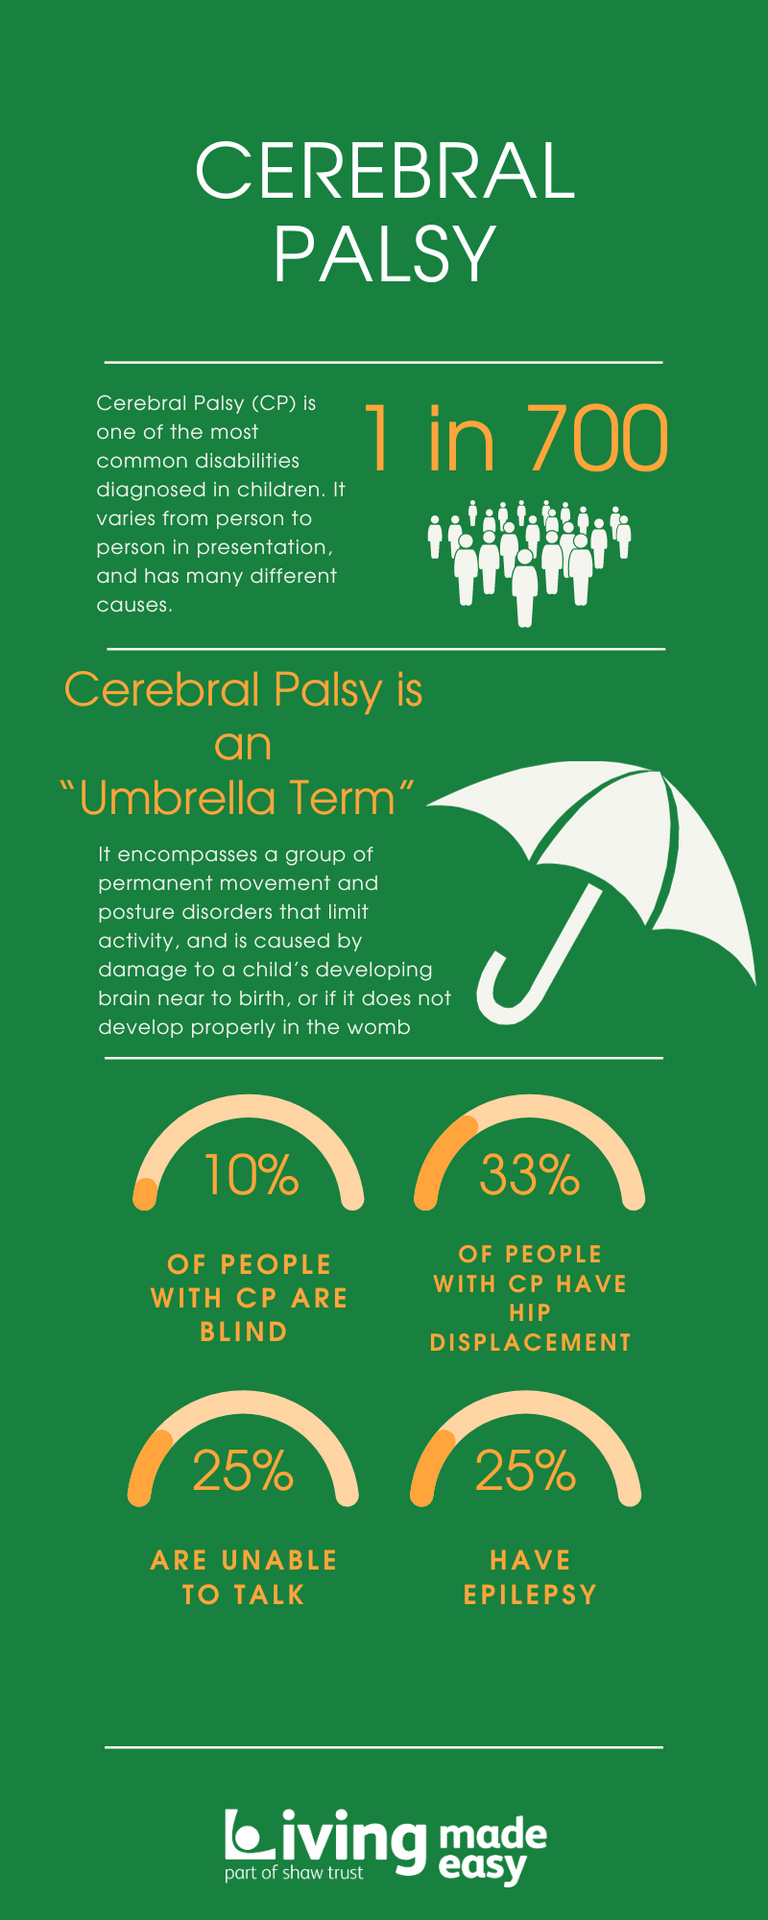 An infographic detailing statistics relating to cerebral palsy. The infographic reads '1 in 700, CP is one of the most common disabilities diagnosed in children. Cerebral Palsy is an Umbrella Term, it encompasses a group of permanent movement and posture disorders that limit activity and is caused by damage to a child's developing brain near to birth, or if it does not develop properly in the womb. 10% of people with CP are blind. 33% of people with CP have hip displacement. 25% are unable to talk. 25% have epilepsy'.